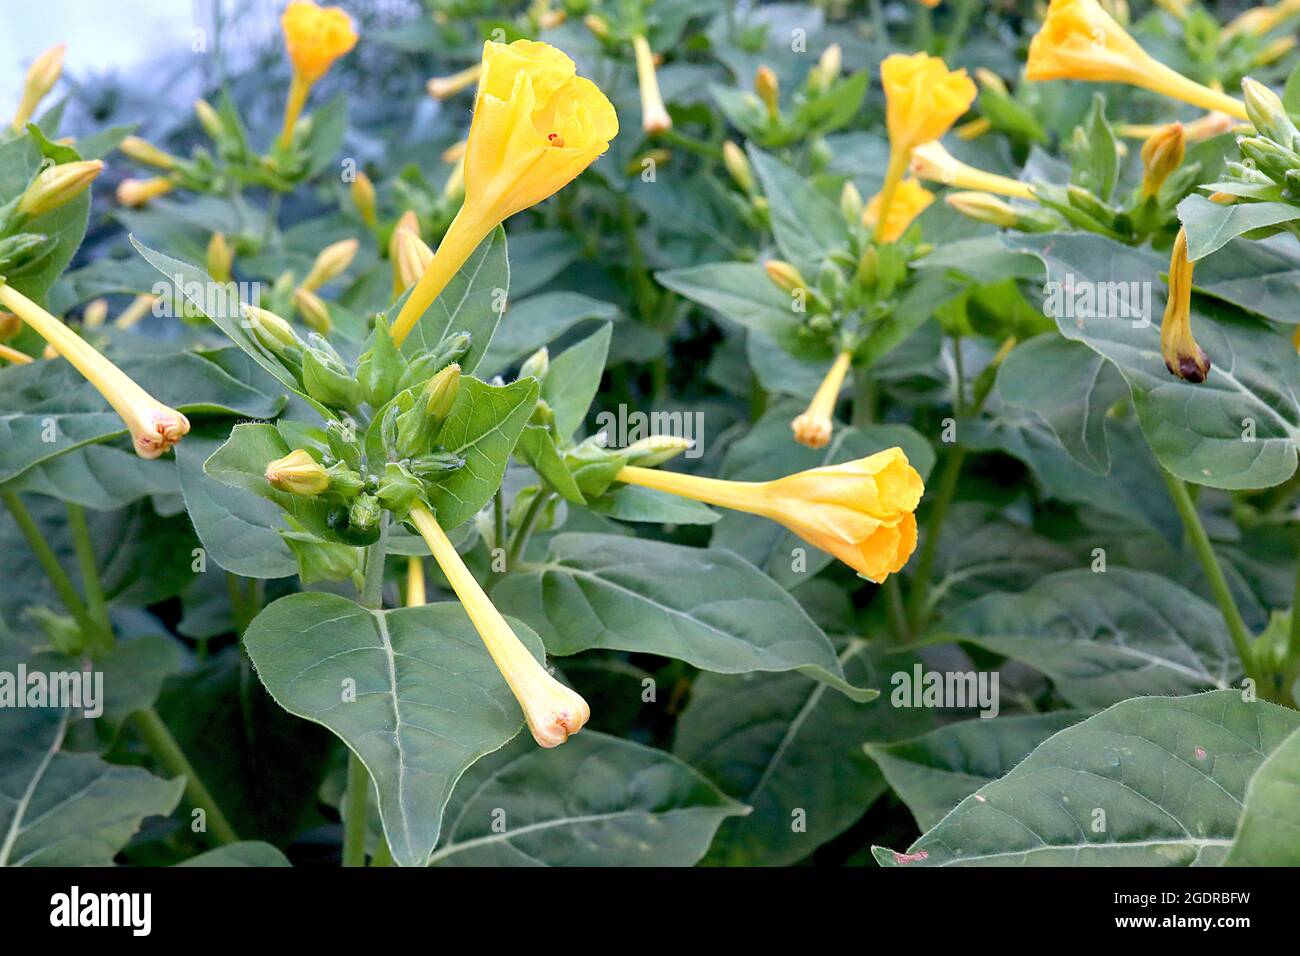 Mirabilis jalapa yellow Marvel of Peru – strongly scented funnel-shaped flowers with ruffled petals, July, England, UK Stock Photo